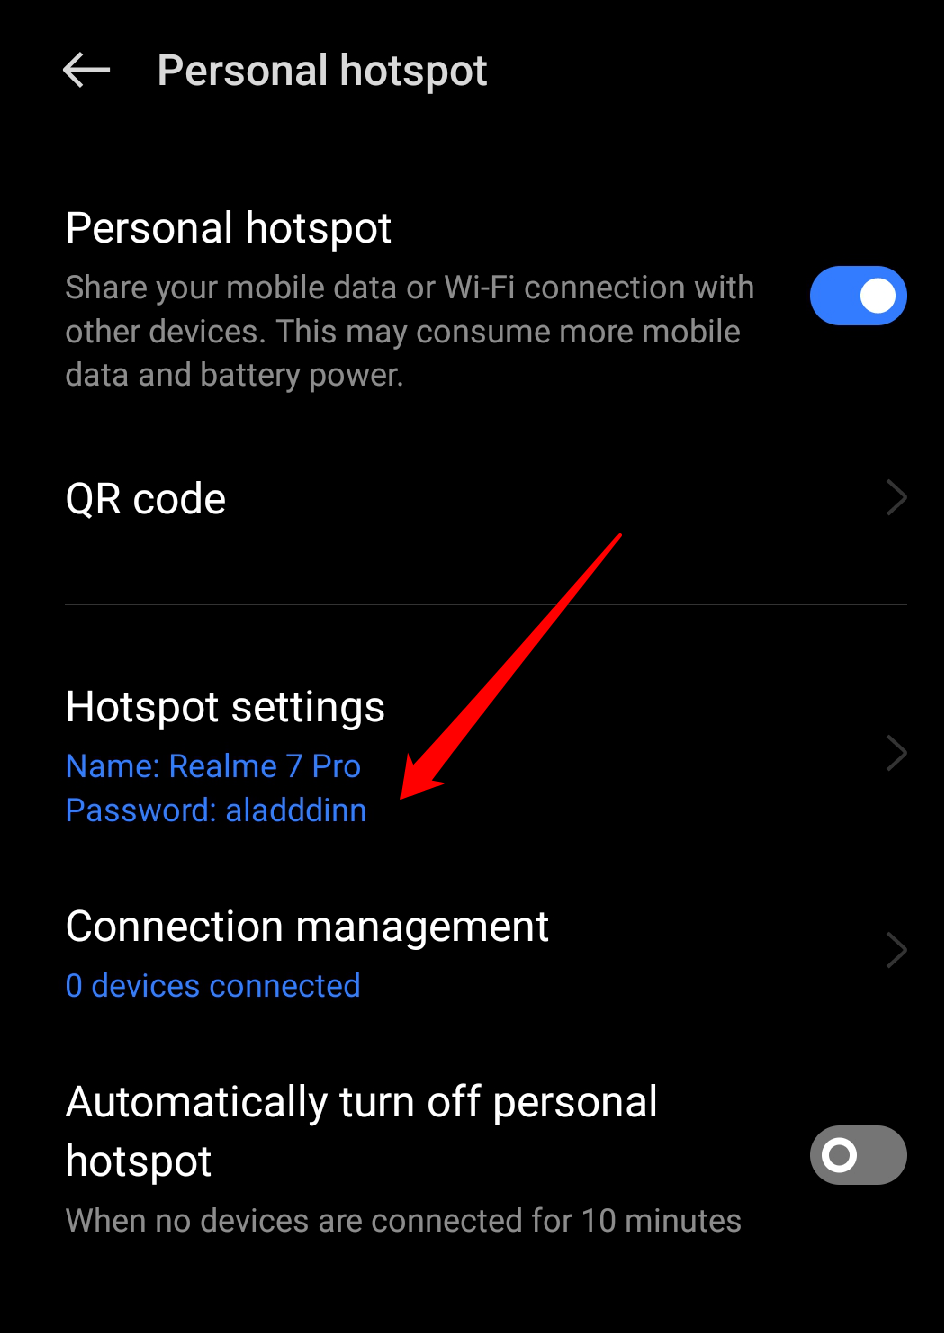 Select Hotspot settings to view the password.